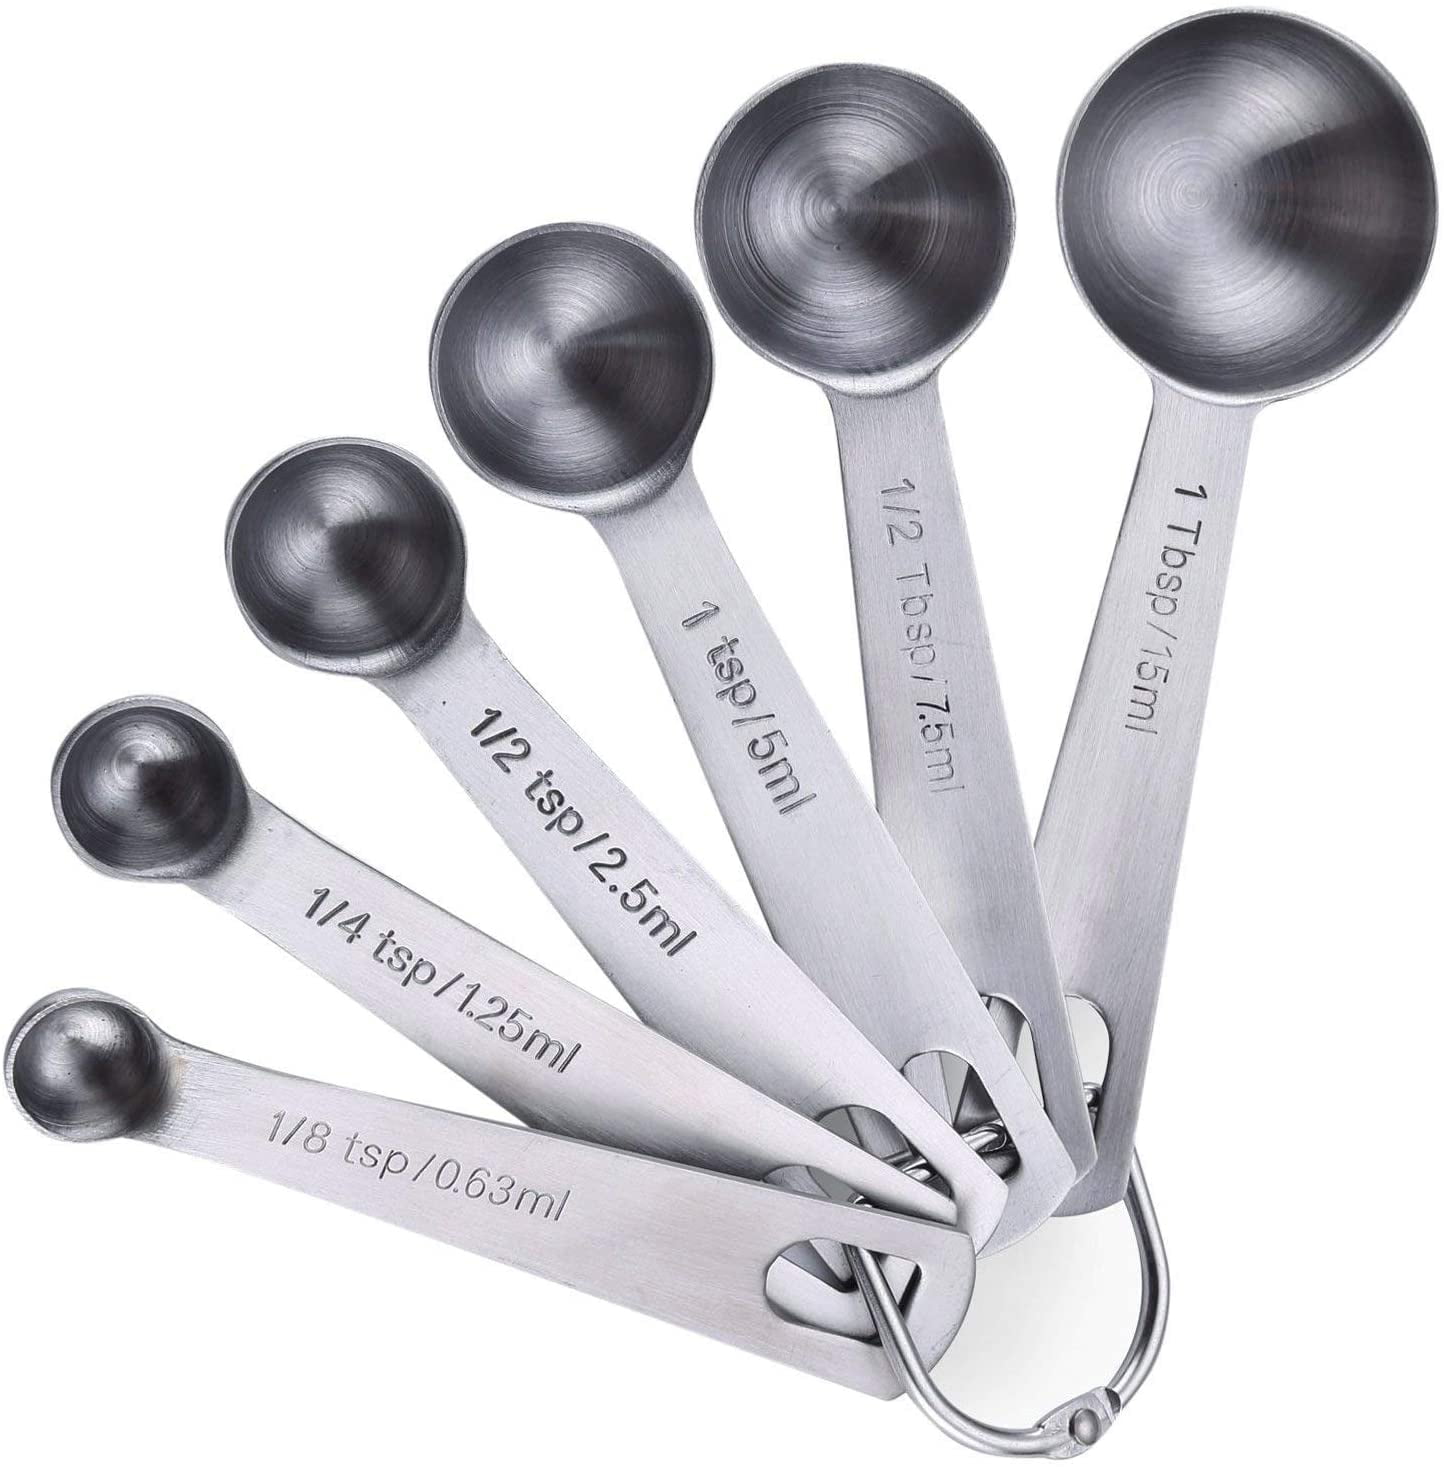 Home & Garden Spoonful 4 Measuring Spoons Pinch tsp 1/4 tsp 1/2 tsp how many oz is 100 ml